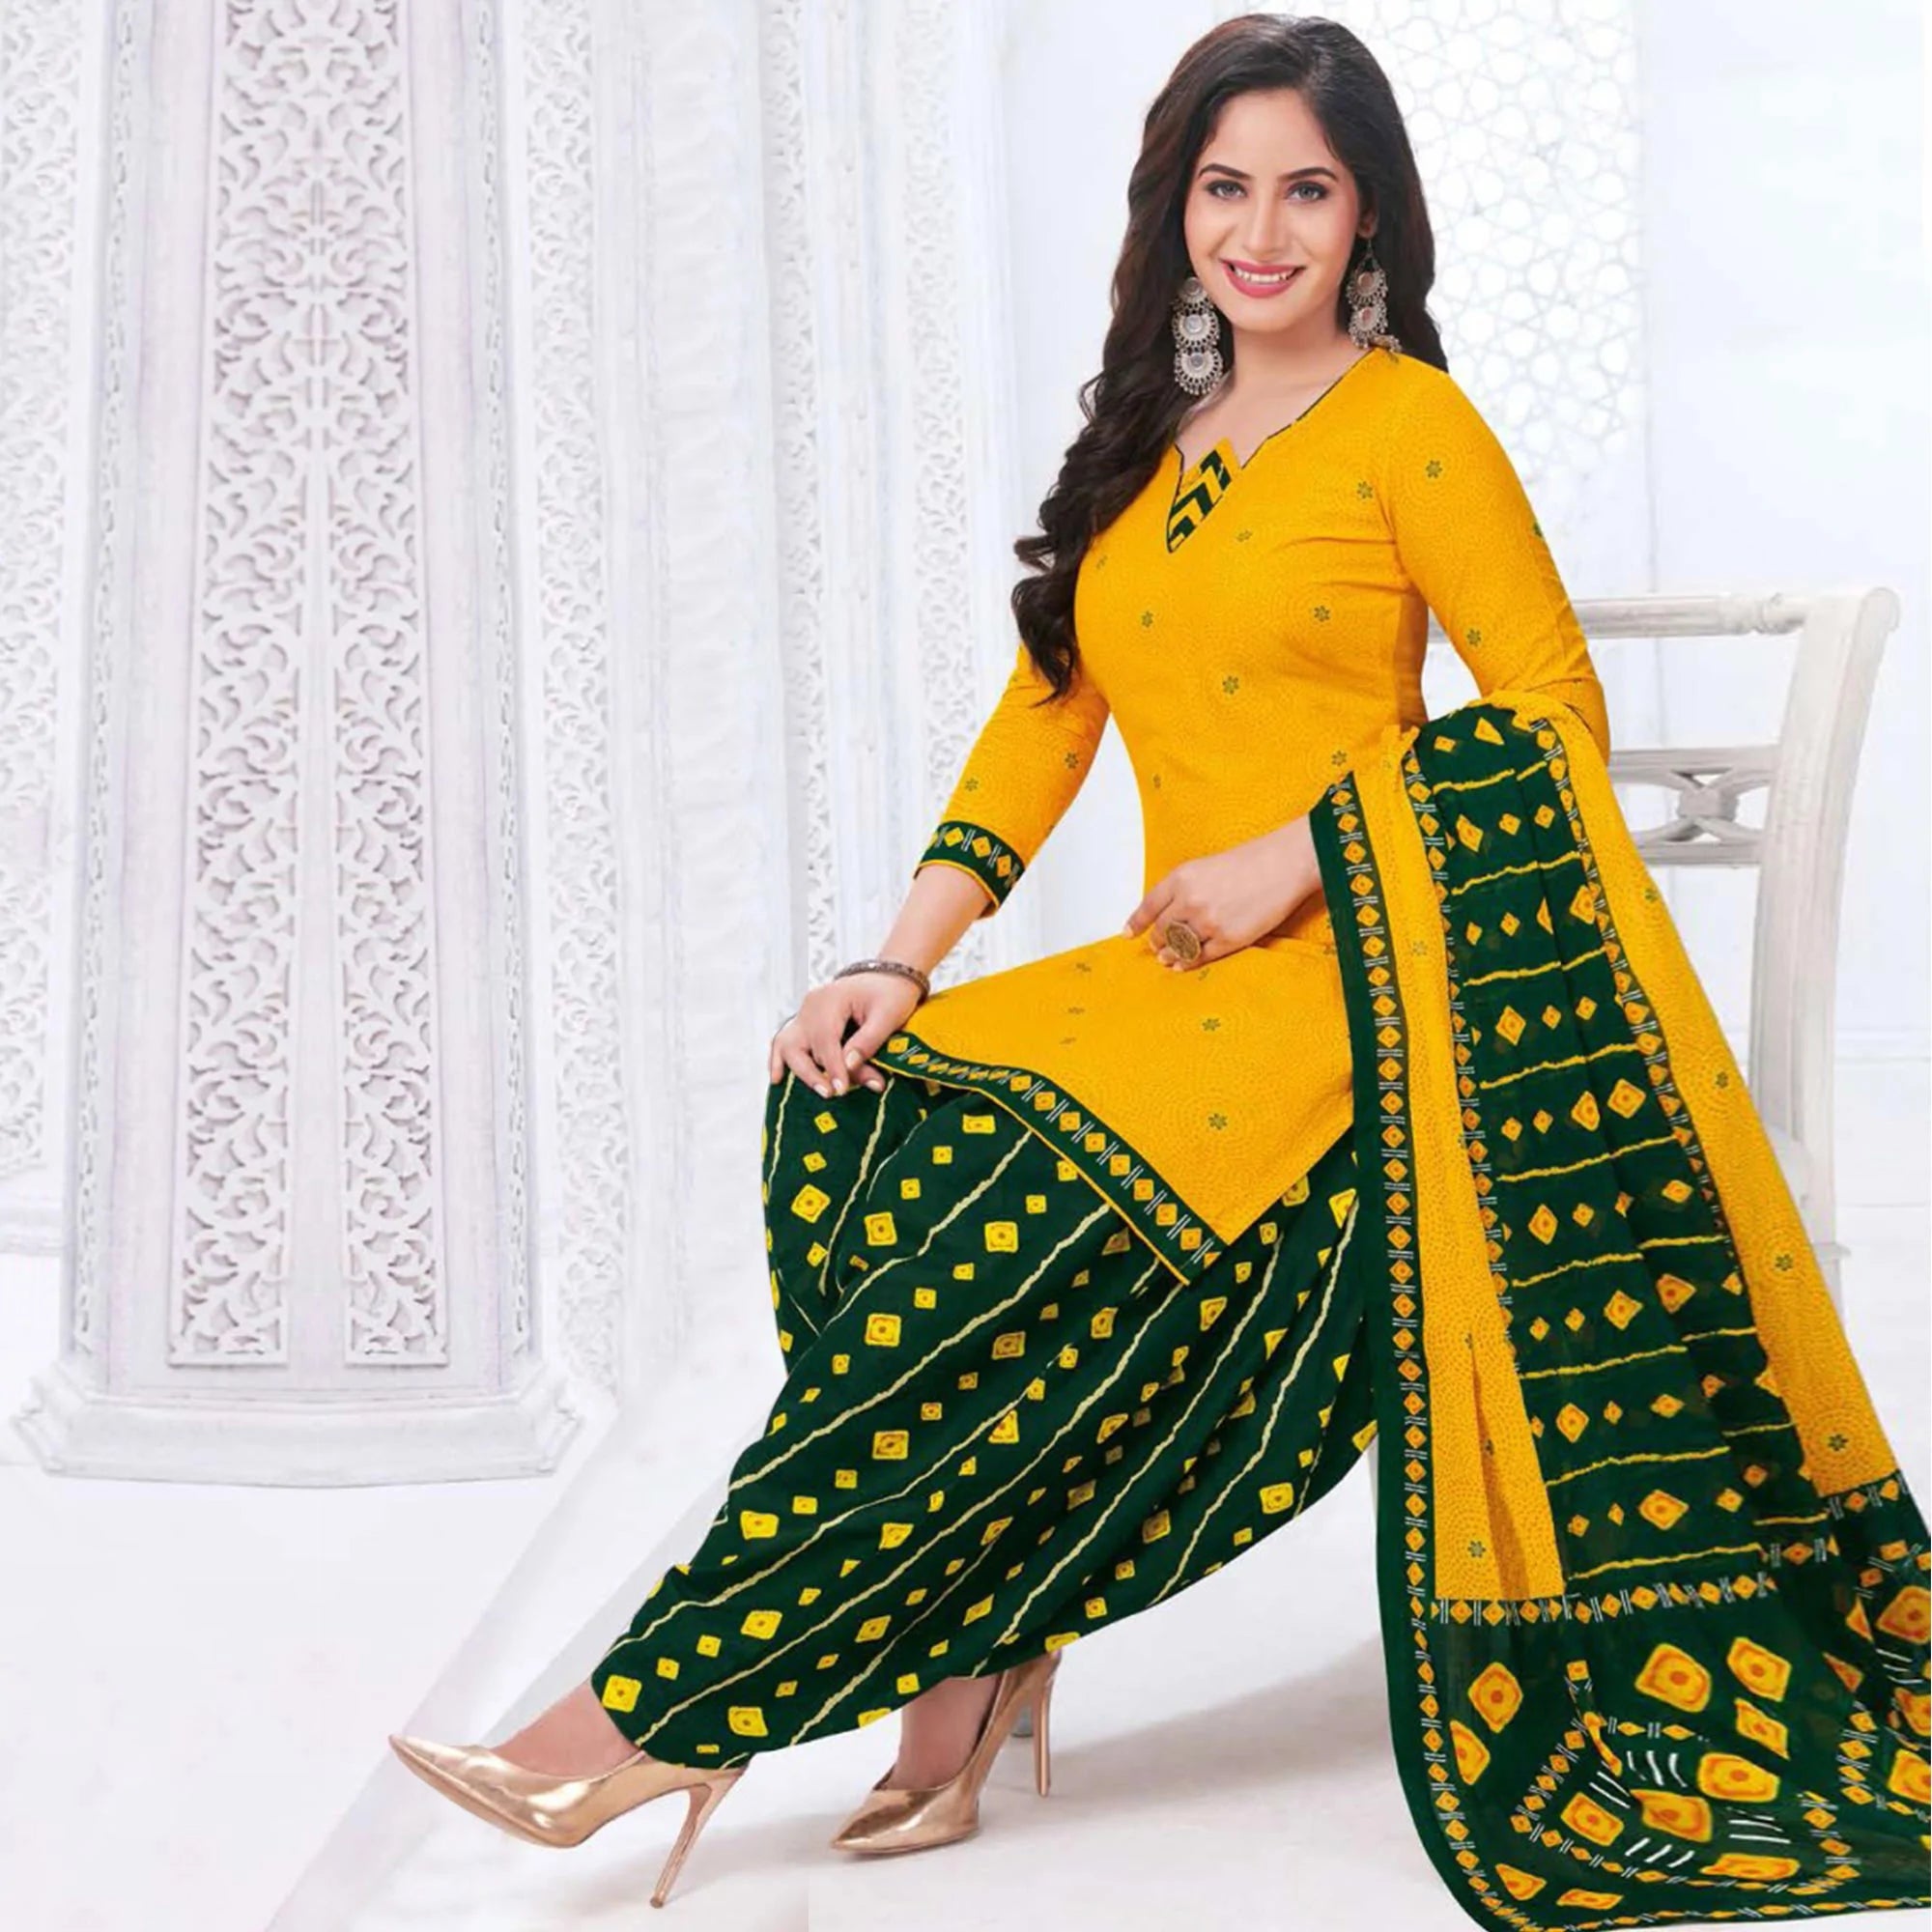 Modern Punjabi Sharara Suit Pics For Sisters | Traditional indian outfits,  Georgette dress, Sharara suit